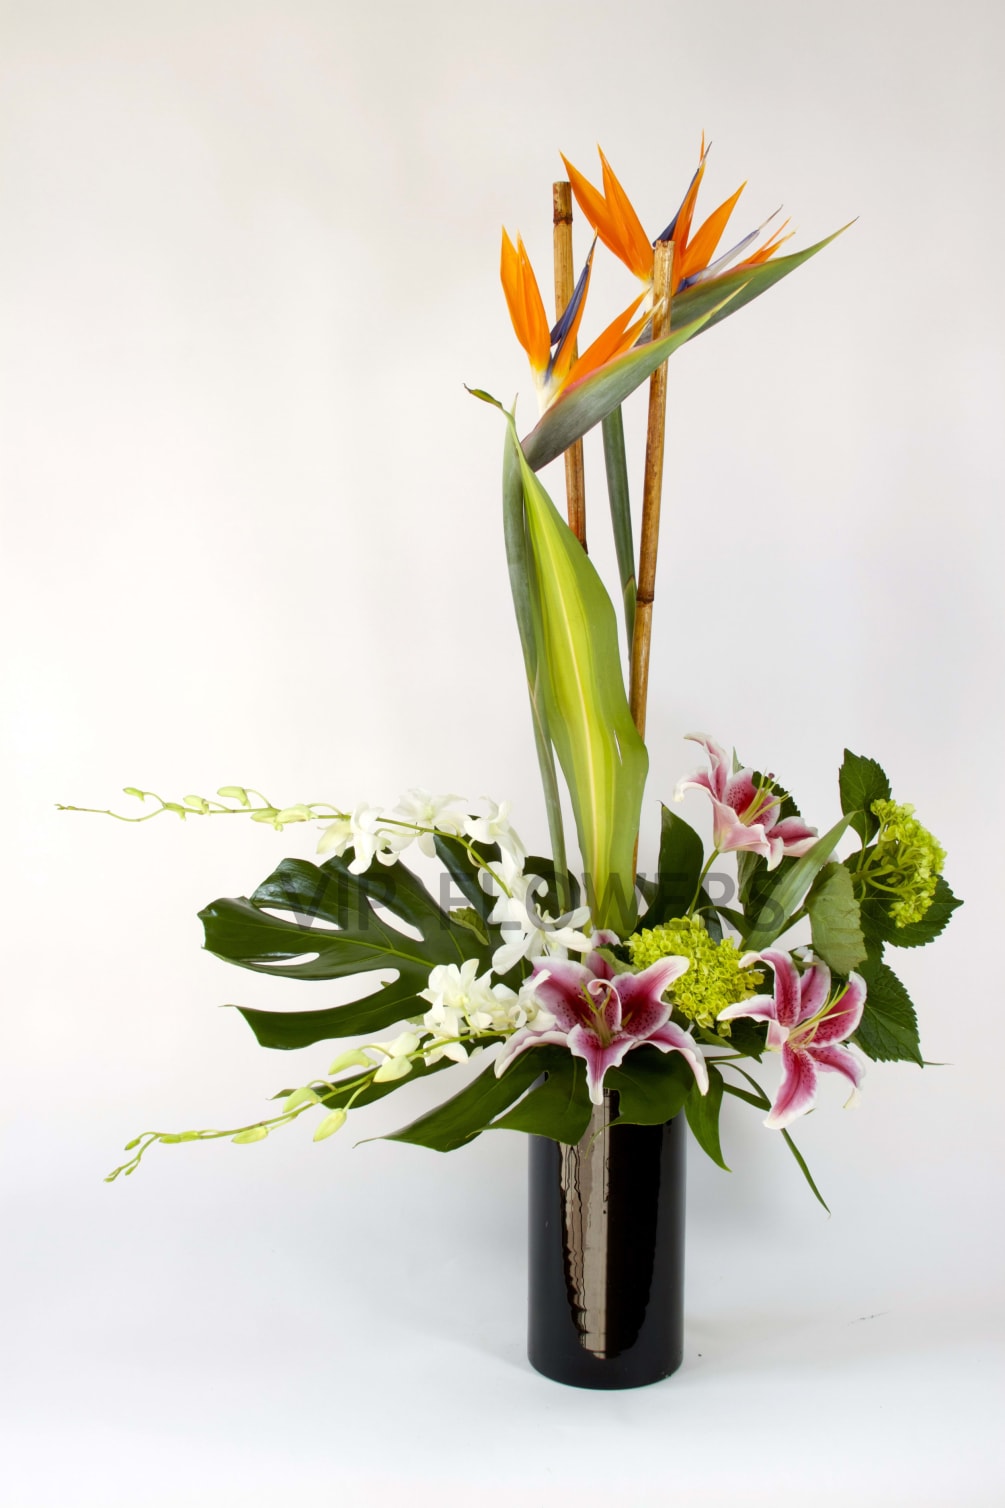 Flowers Included:

Birds of Paradise
Orchids
Lilies
Hydrangeas
Seasonal Greens
 

 

Substitutions may be necessary to ensure